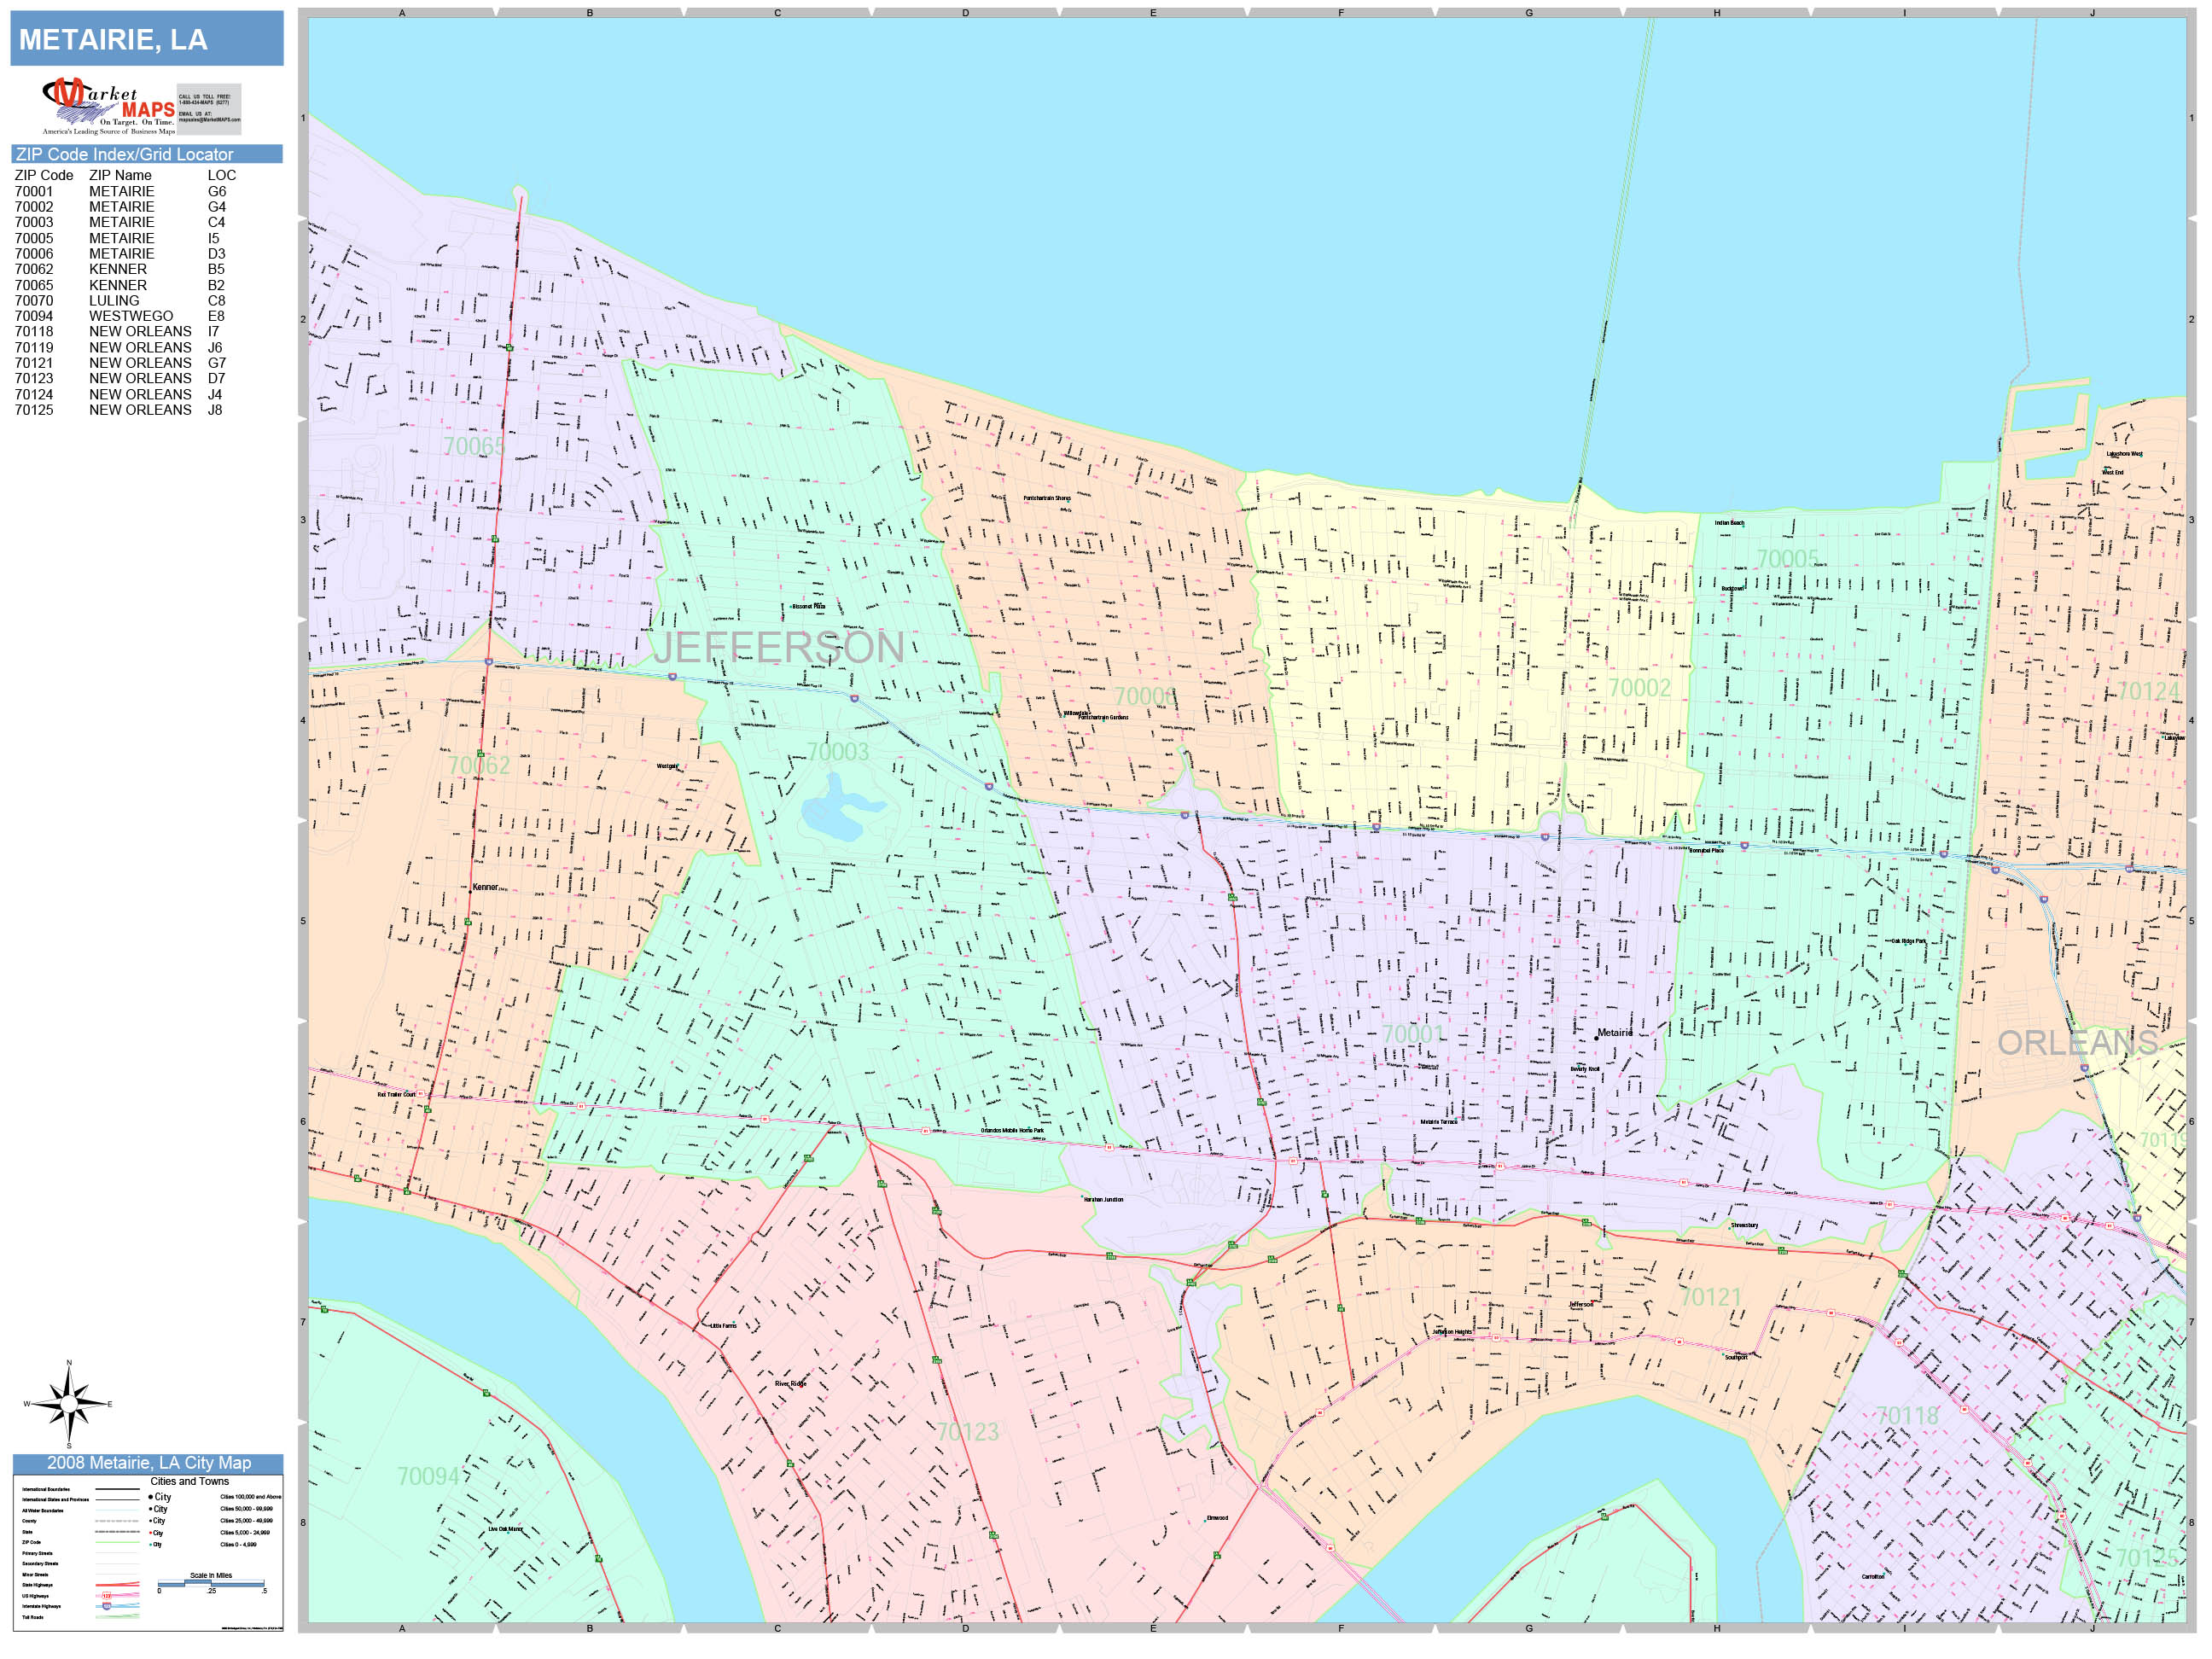 Metairie Louisiana Wall Map (Color Cast Style) by MarketMAPS - MapSales.com